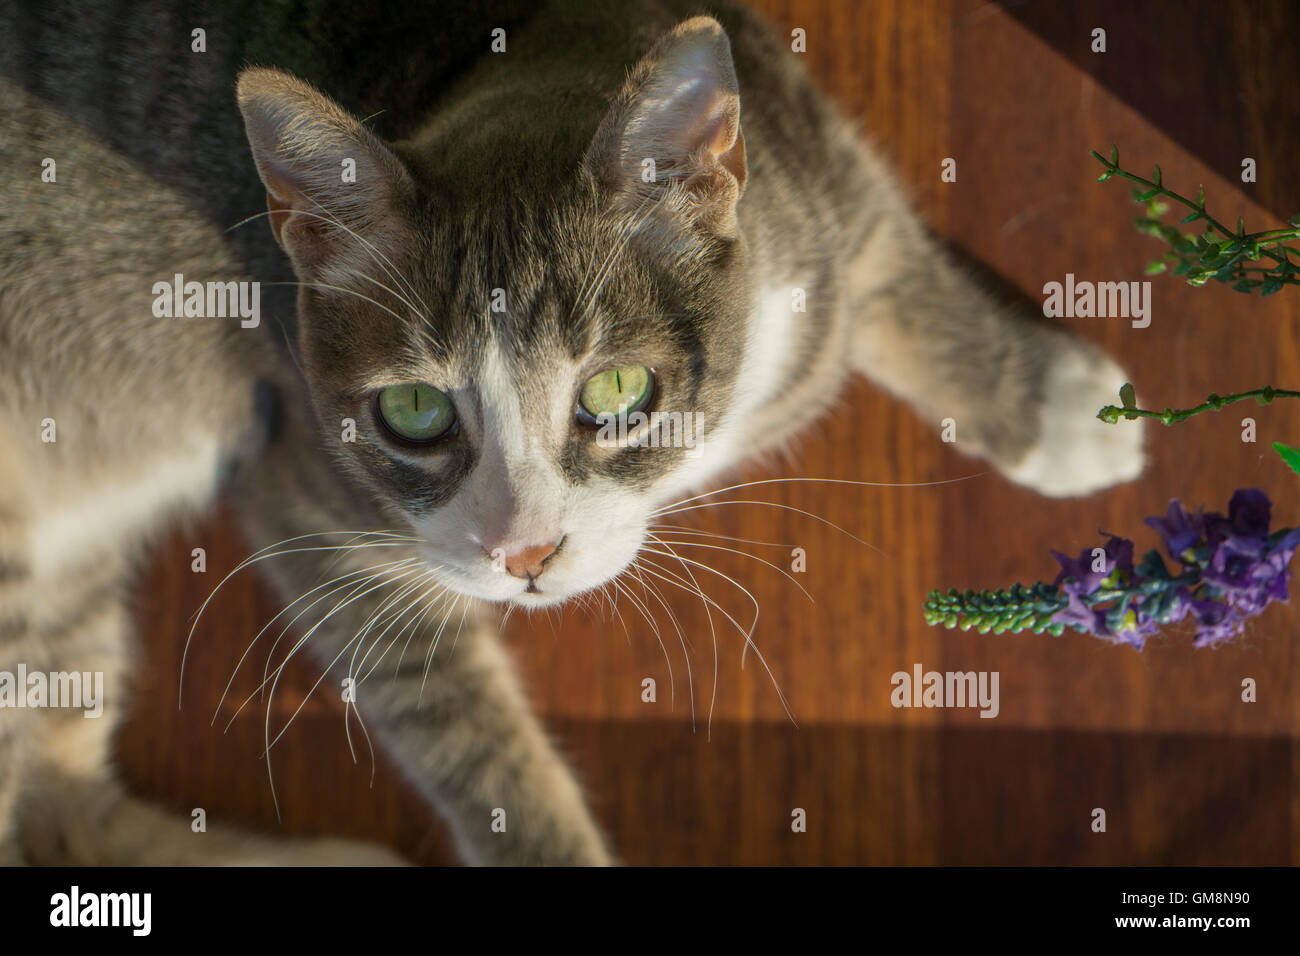 cat picture with a vertical pov Stock Photo